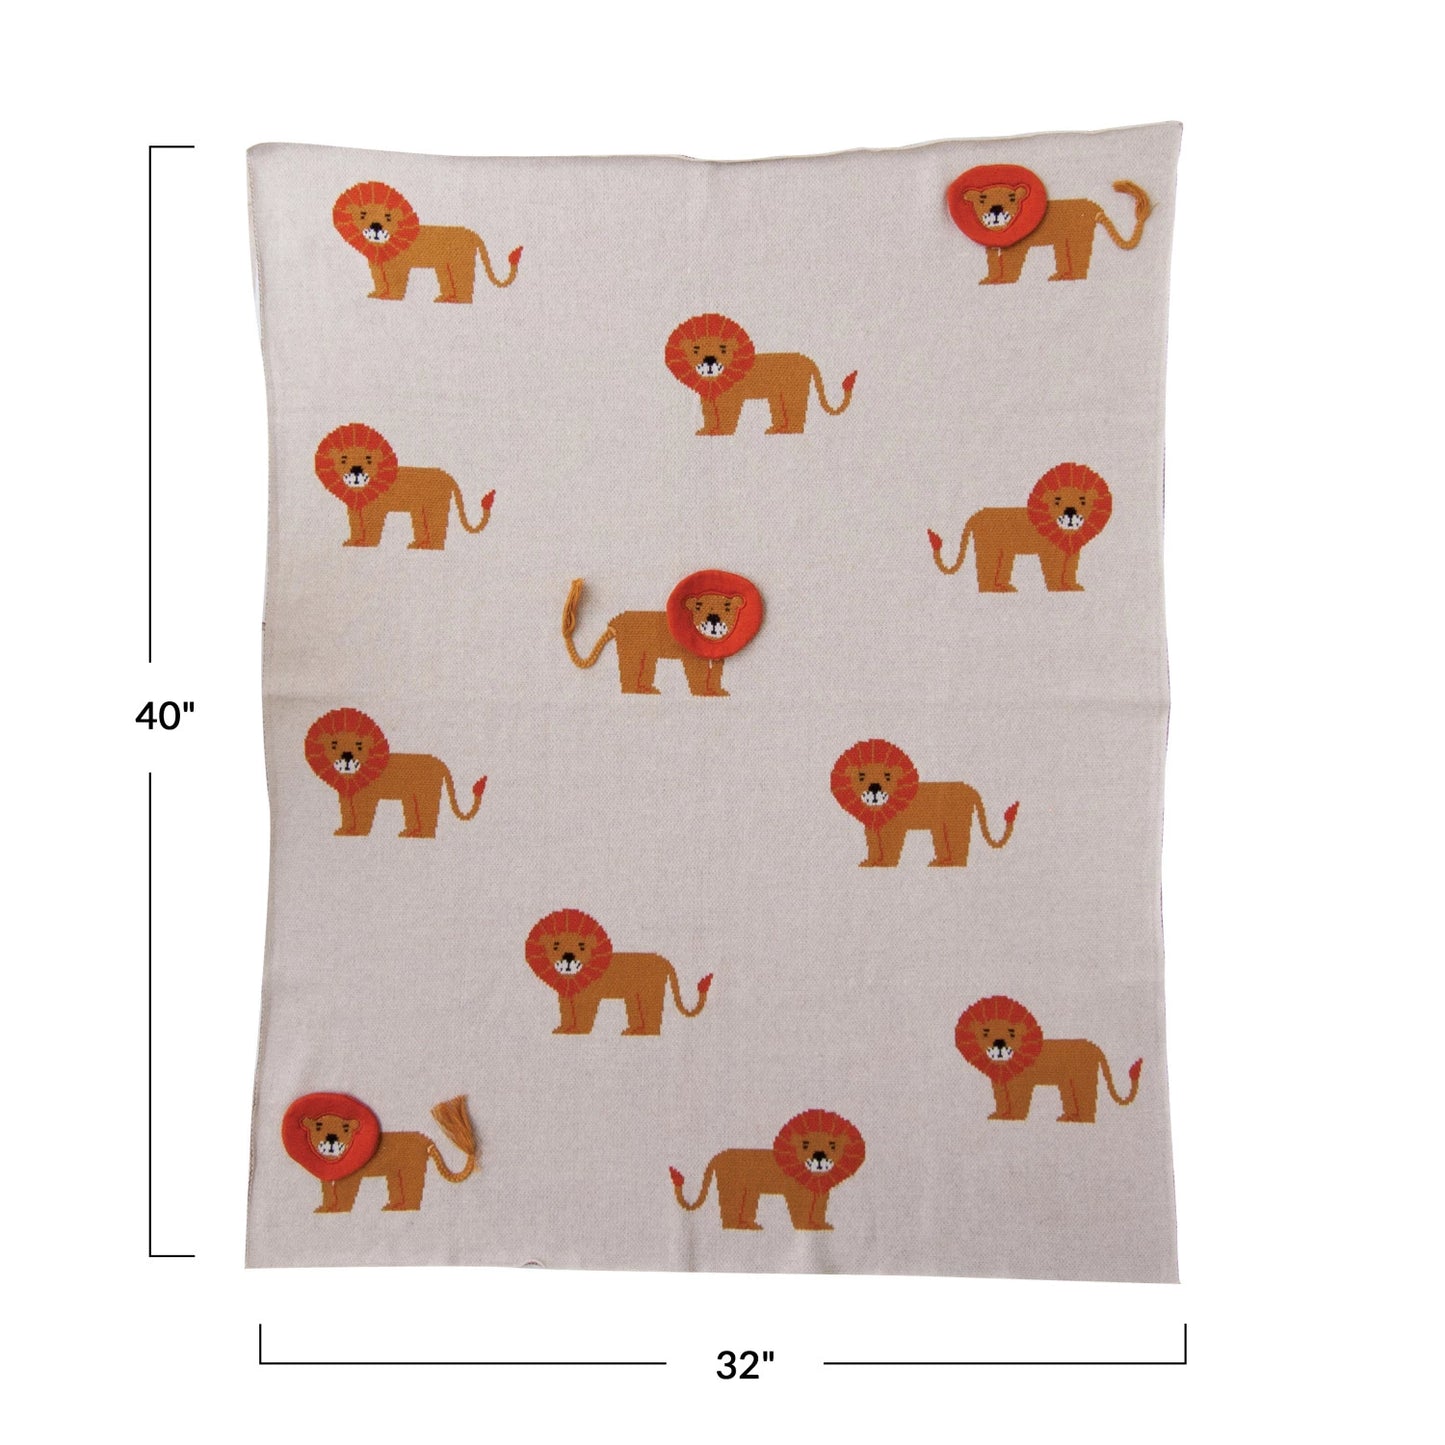 Cotton Knit Blanket with Lions